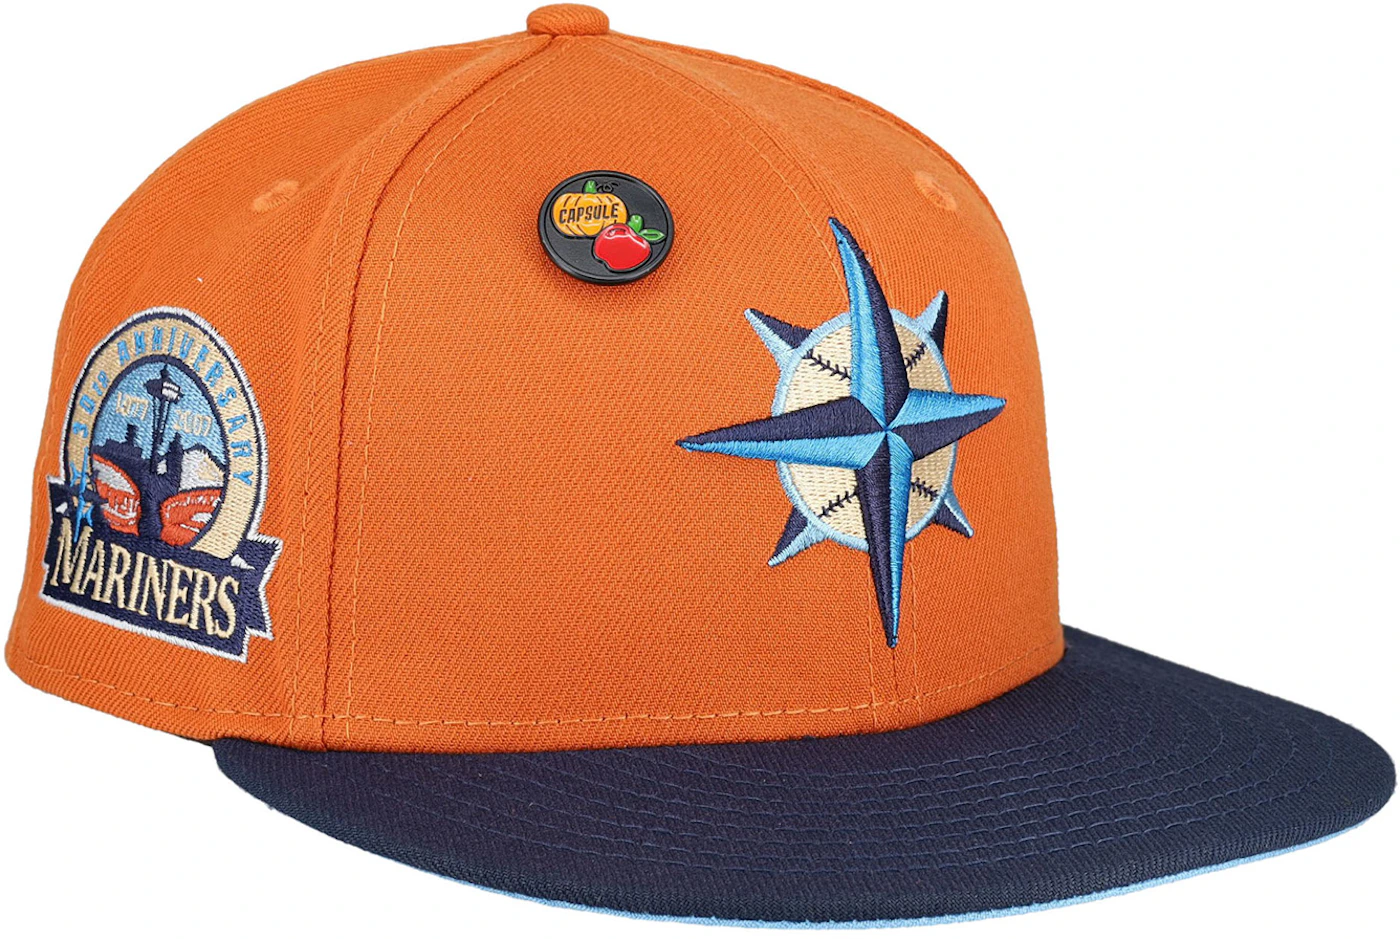 New Era Seattle Mariners Trident Throwback Edition 59Fifty Fitted Cap, EXCLUSIVE HATS, CAPS